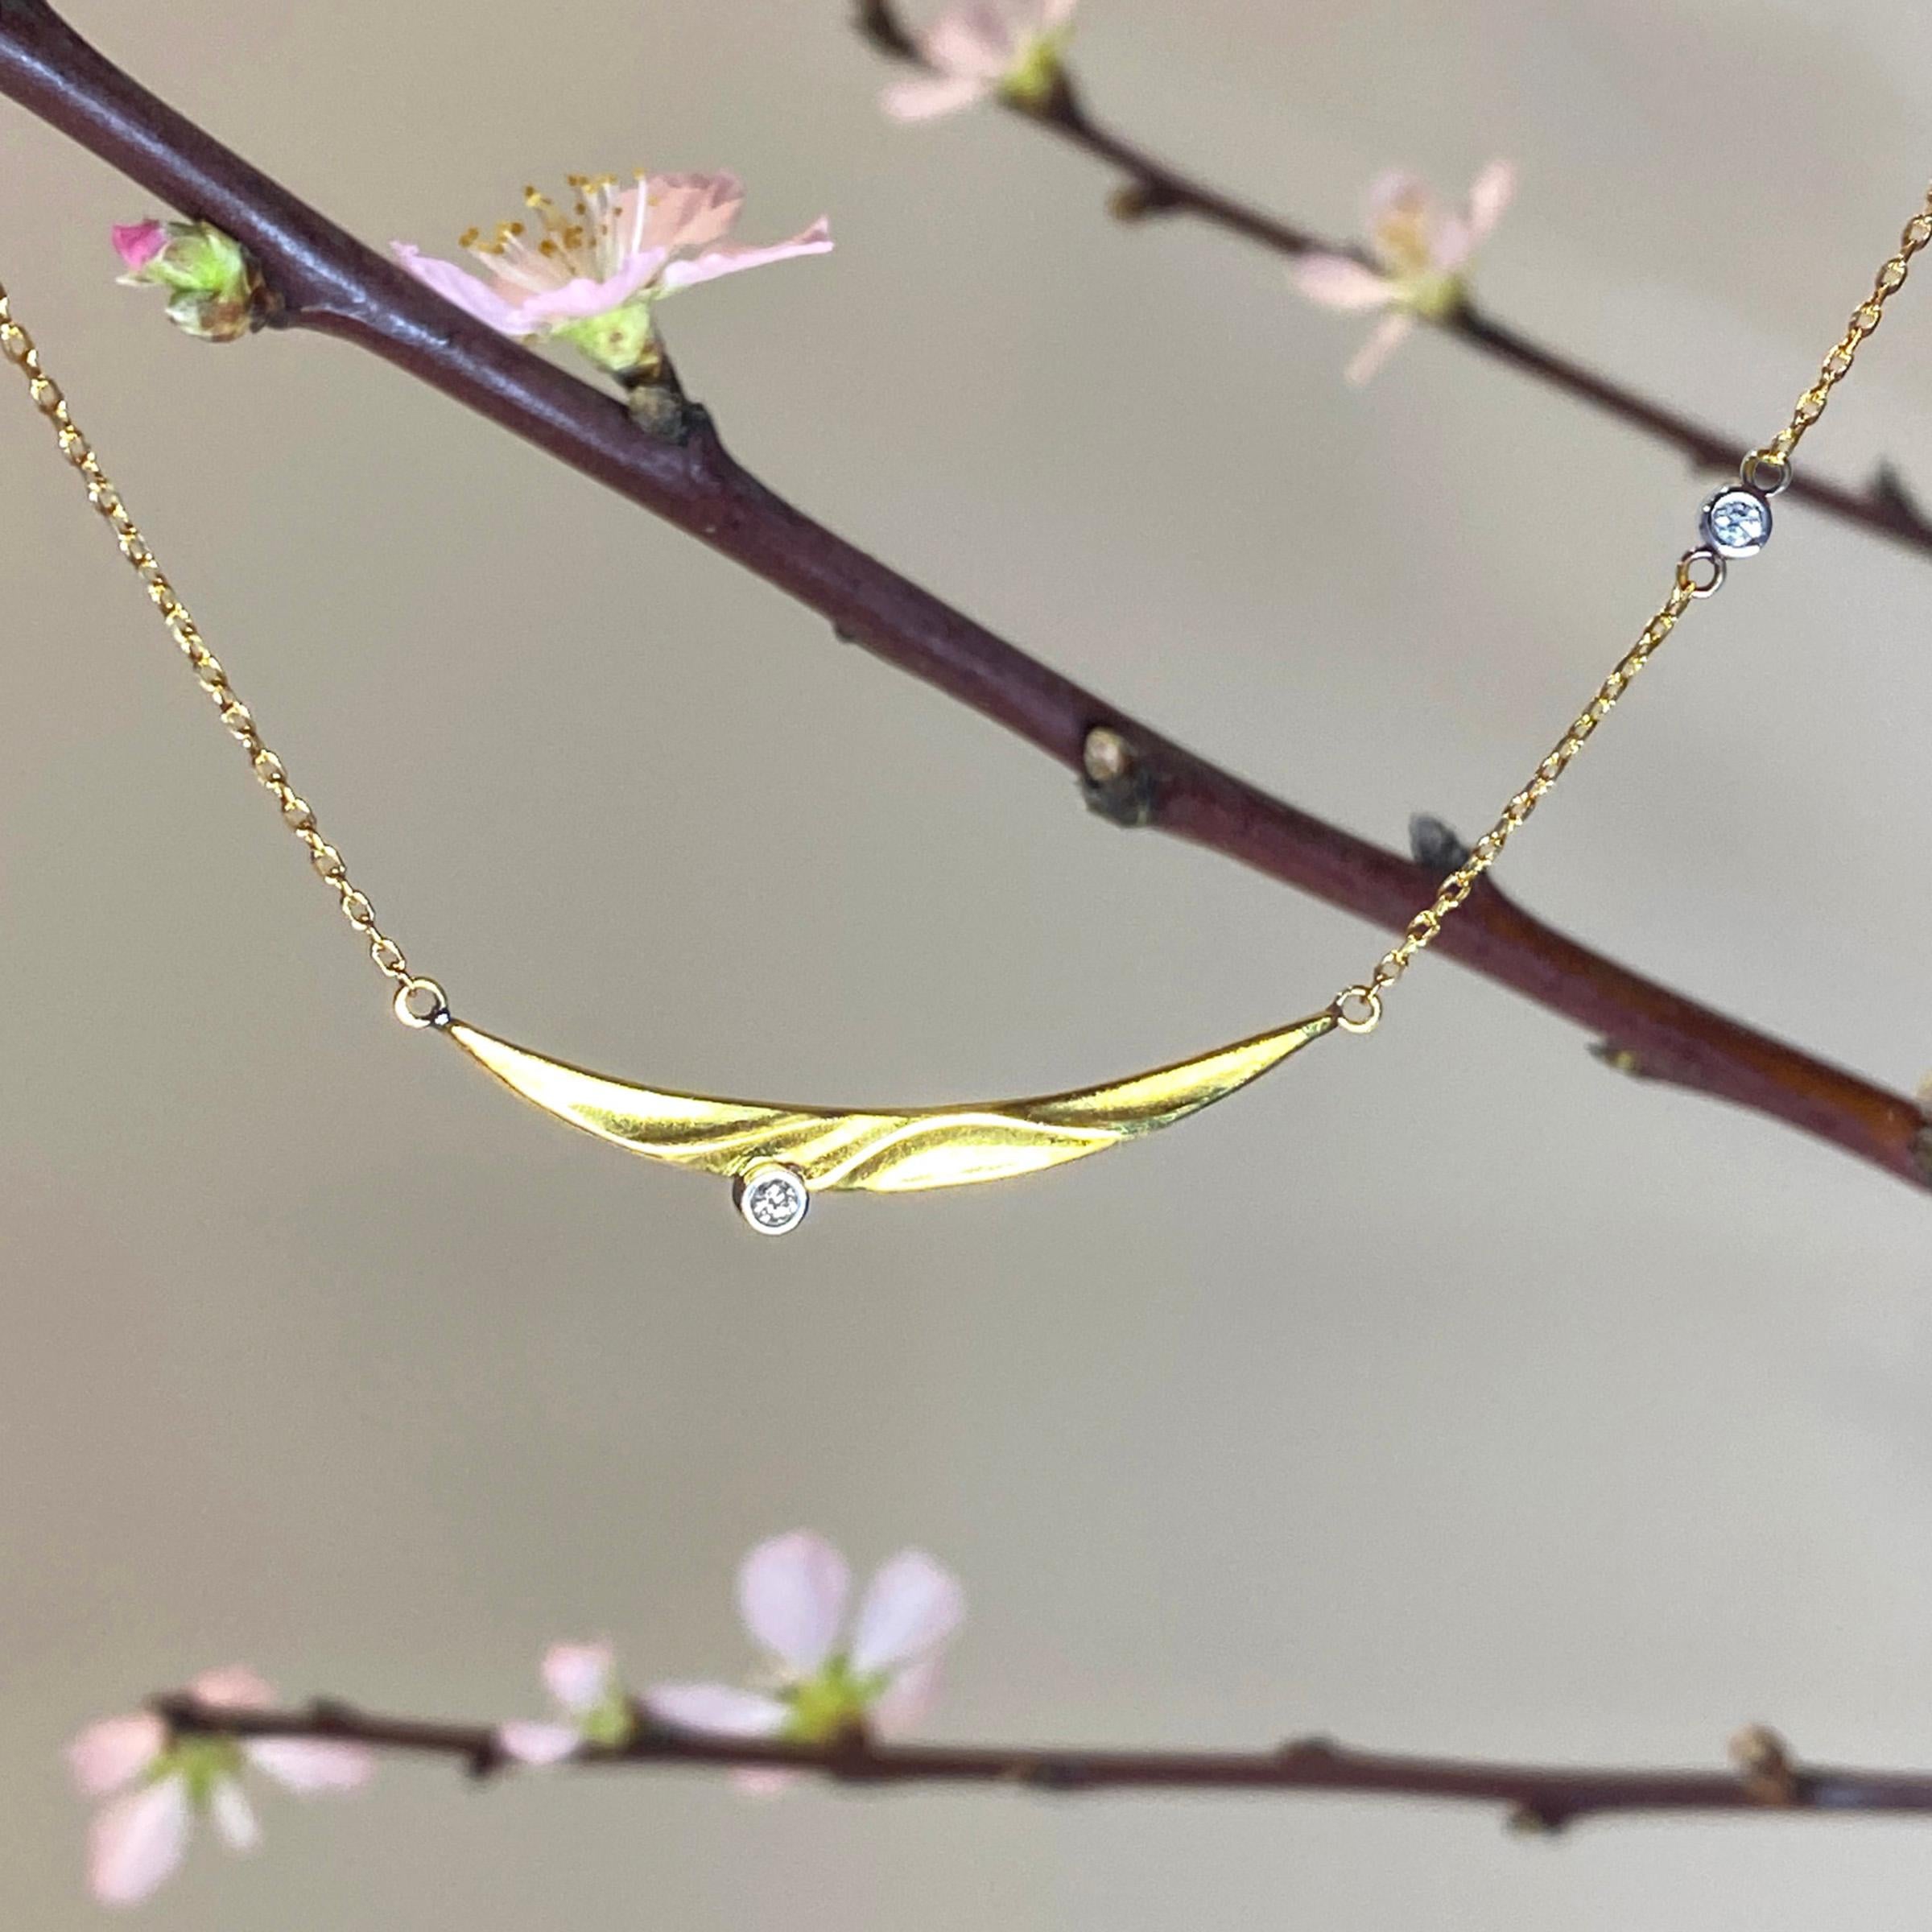 Keiko Mita's modern Seaside Necklace is handmade by the artist from 14 Karat Yellow Gold and 0.06 Carats Diamonds. The contemporary pendant, which is 43 mm wide and 5 mm high, is presented on a diamond cut 14 Karat Gold cable chain that is 16